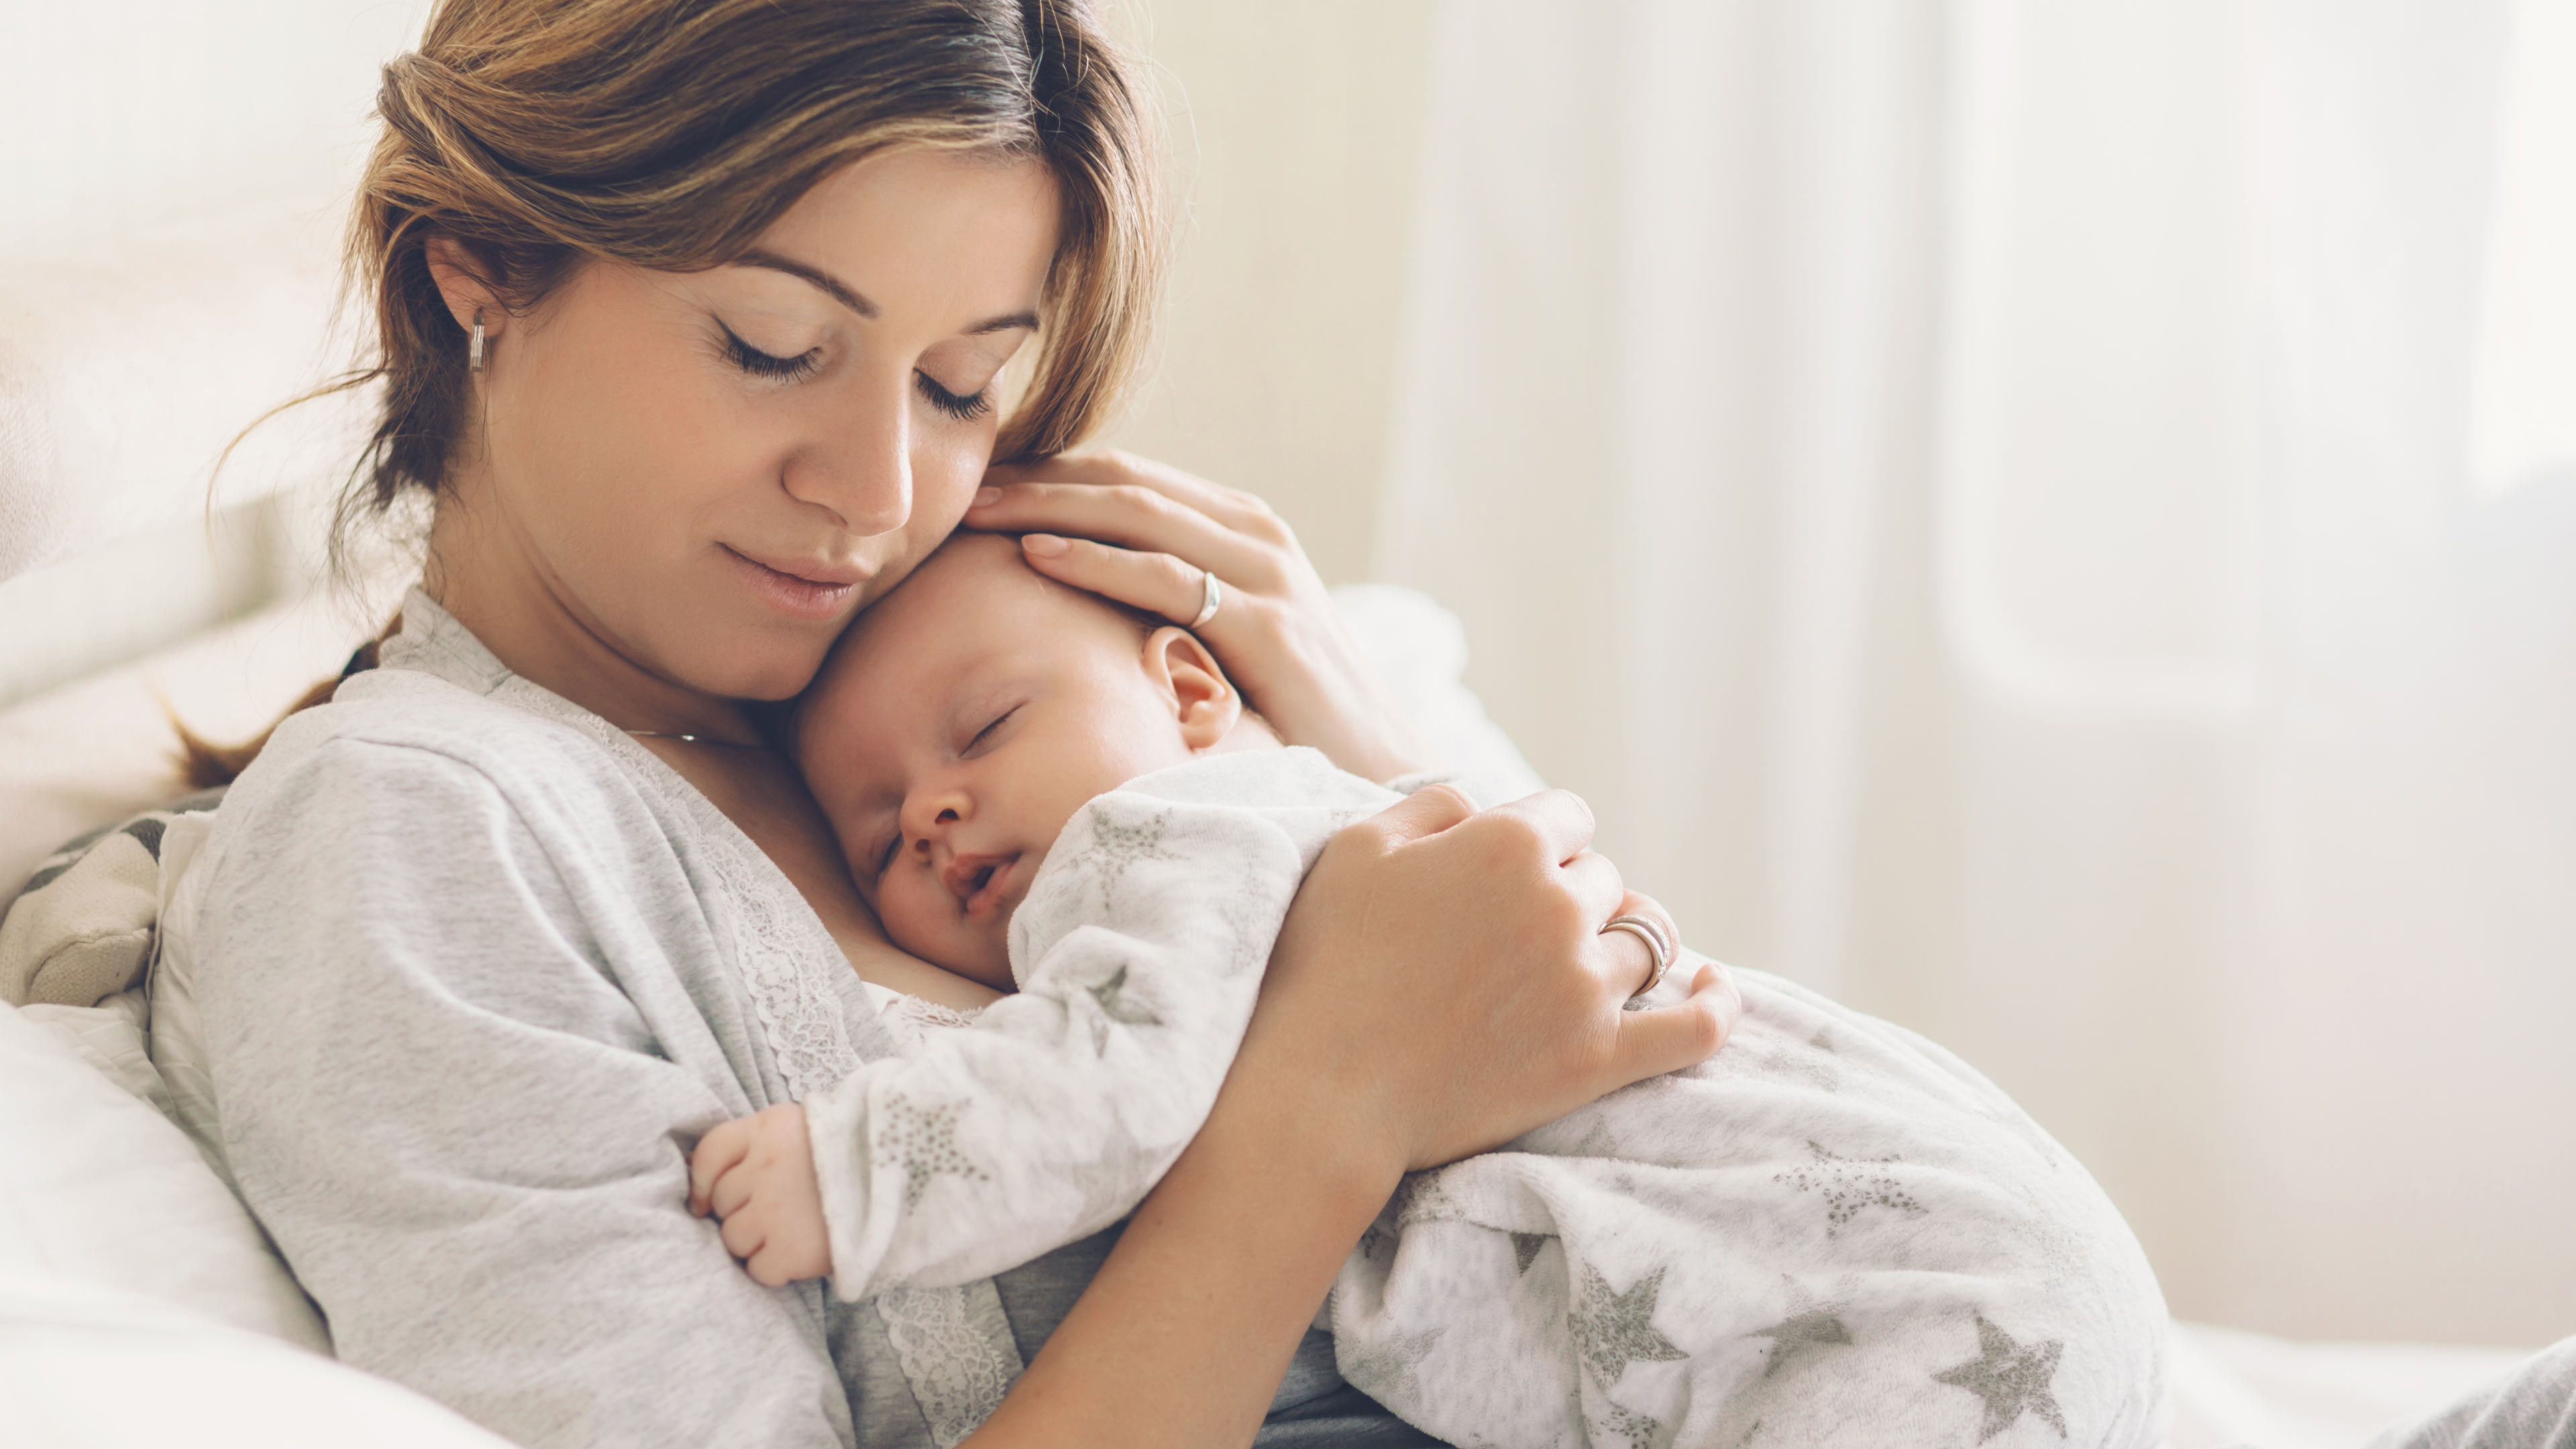 Fourth trimester: Earlier postpartum care for new moms